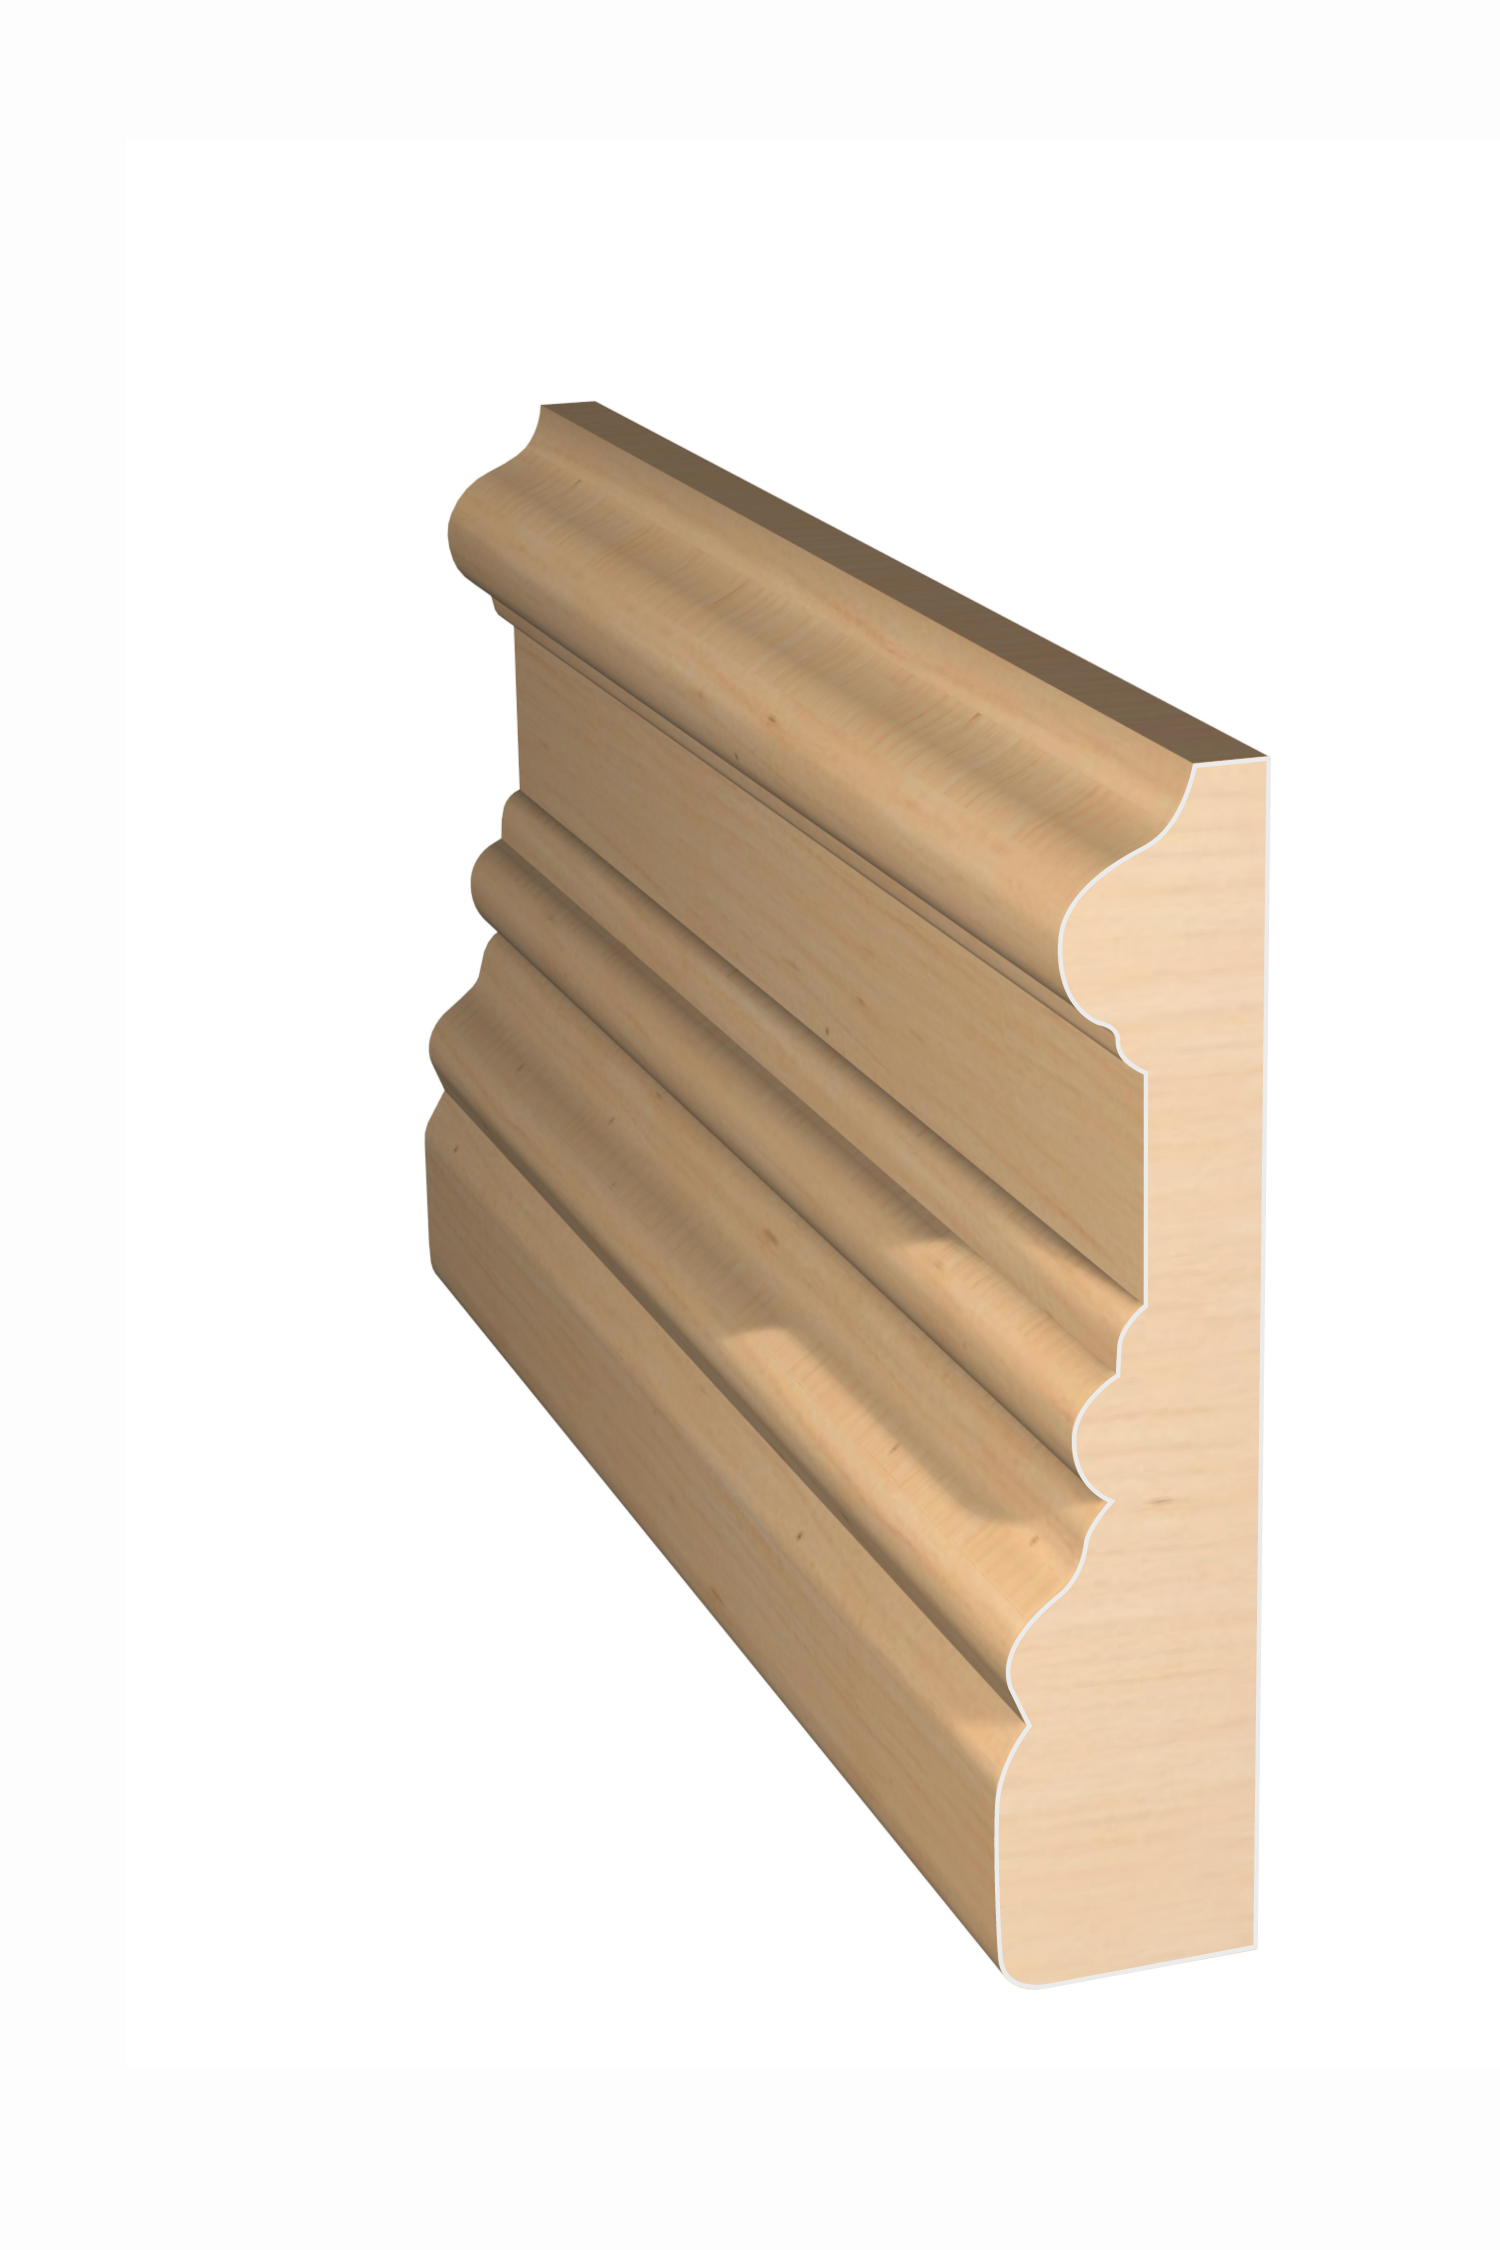 Three dimensional rendering of custom casing wood molding CAPL3145 made by Public Lumber Company in Detroit.